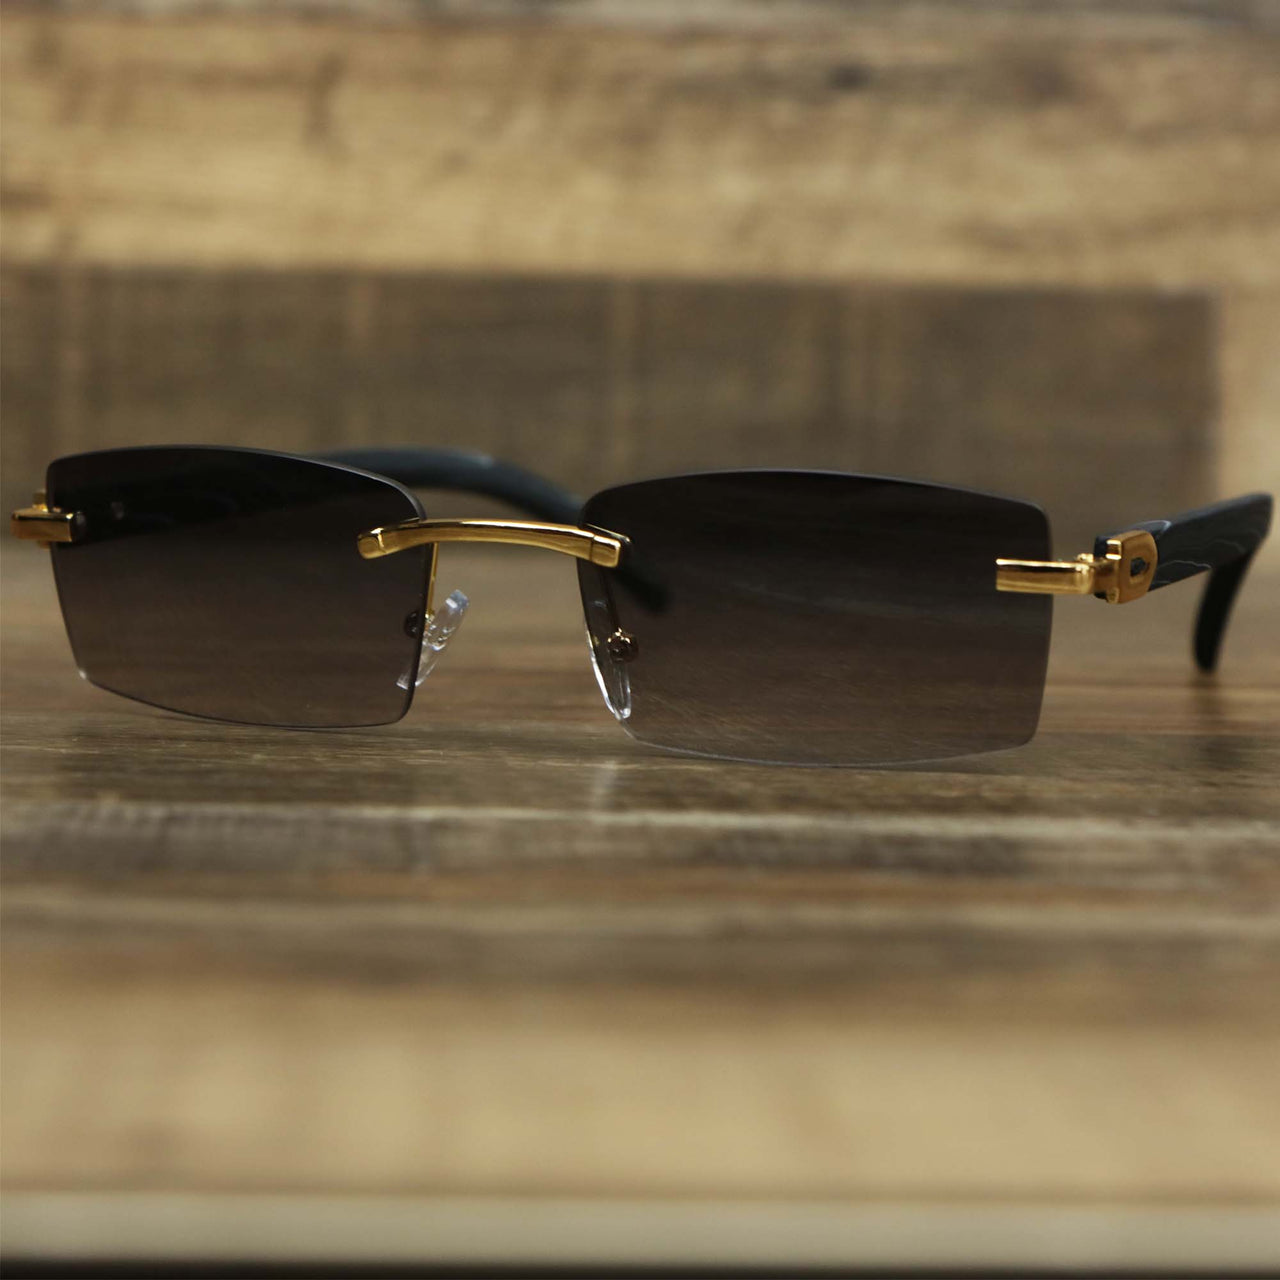 The Rectangle Wood and Metal Frame Black Lens Sunglasses with Gold Frame